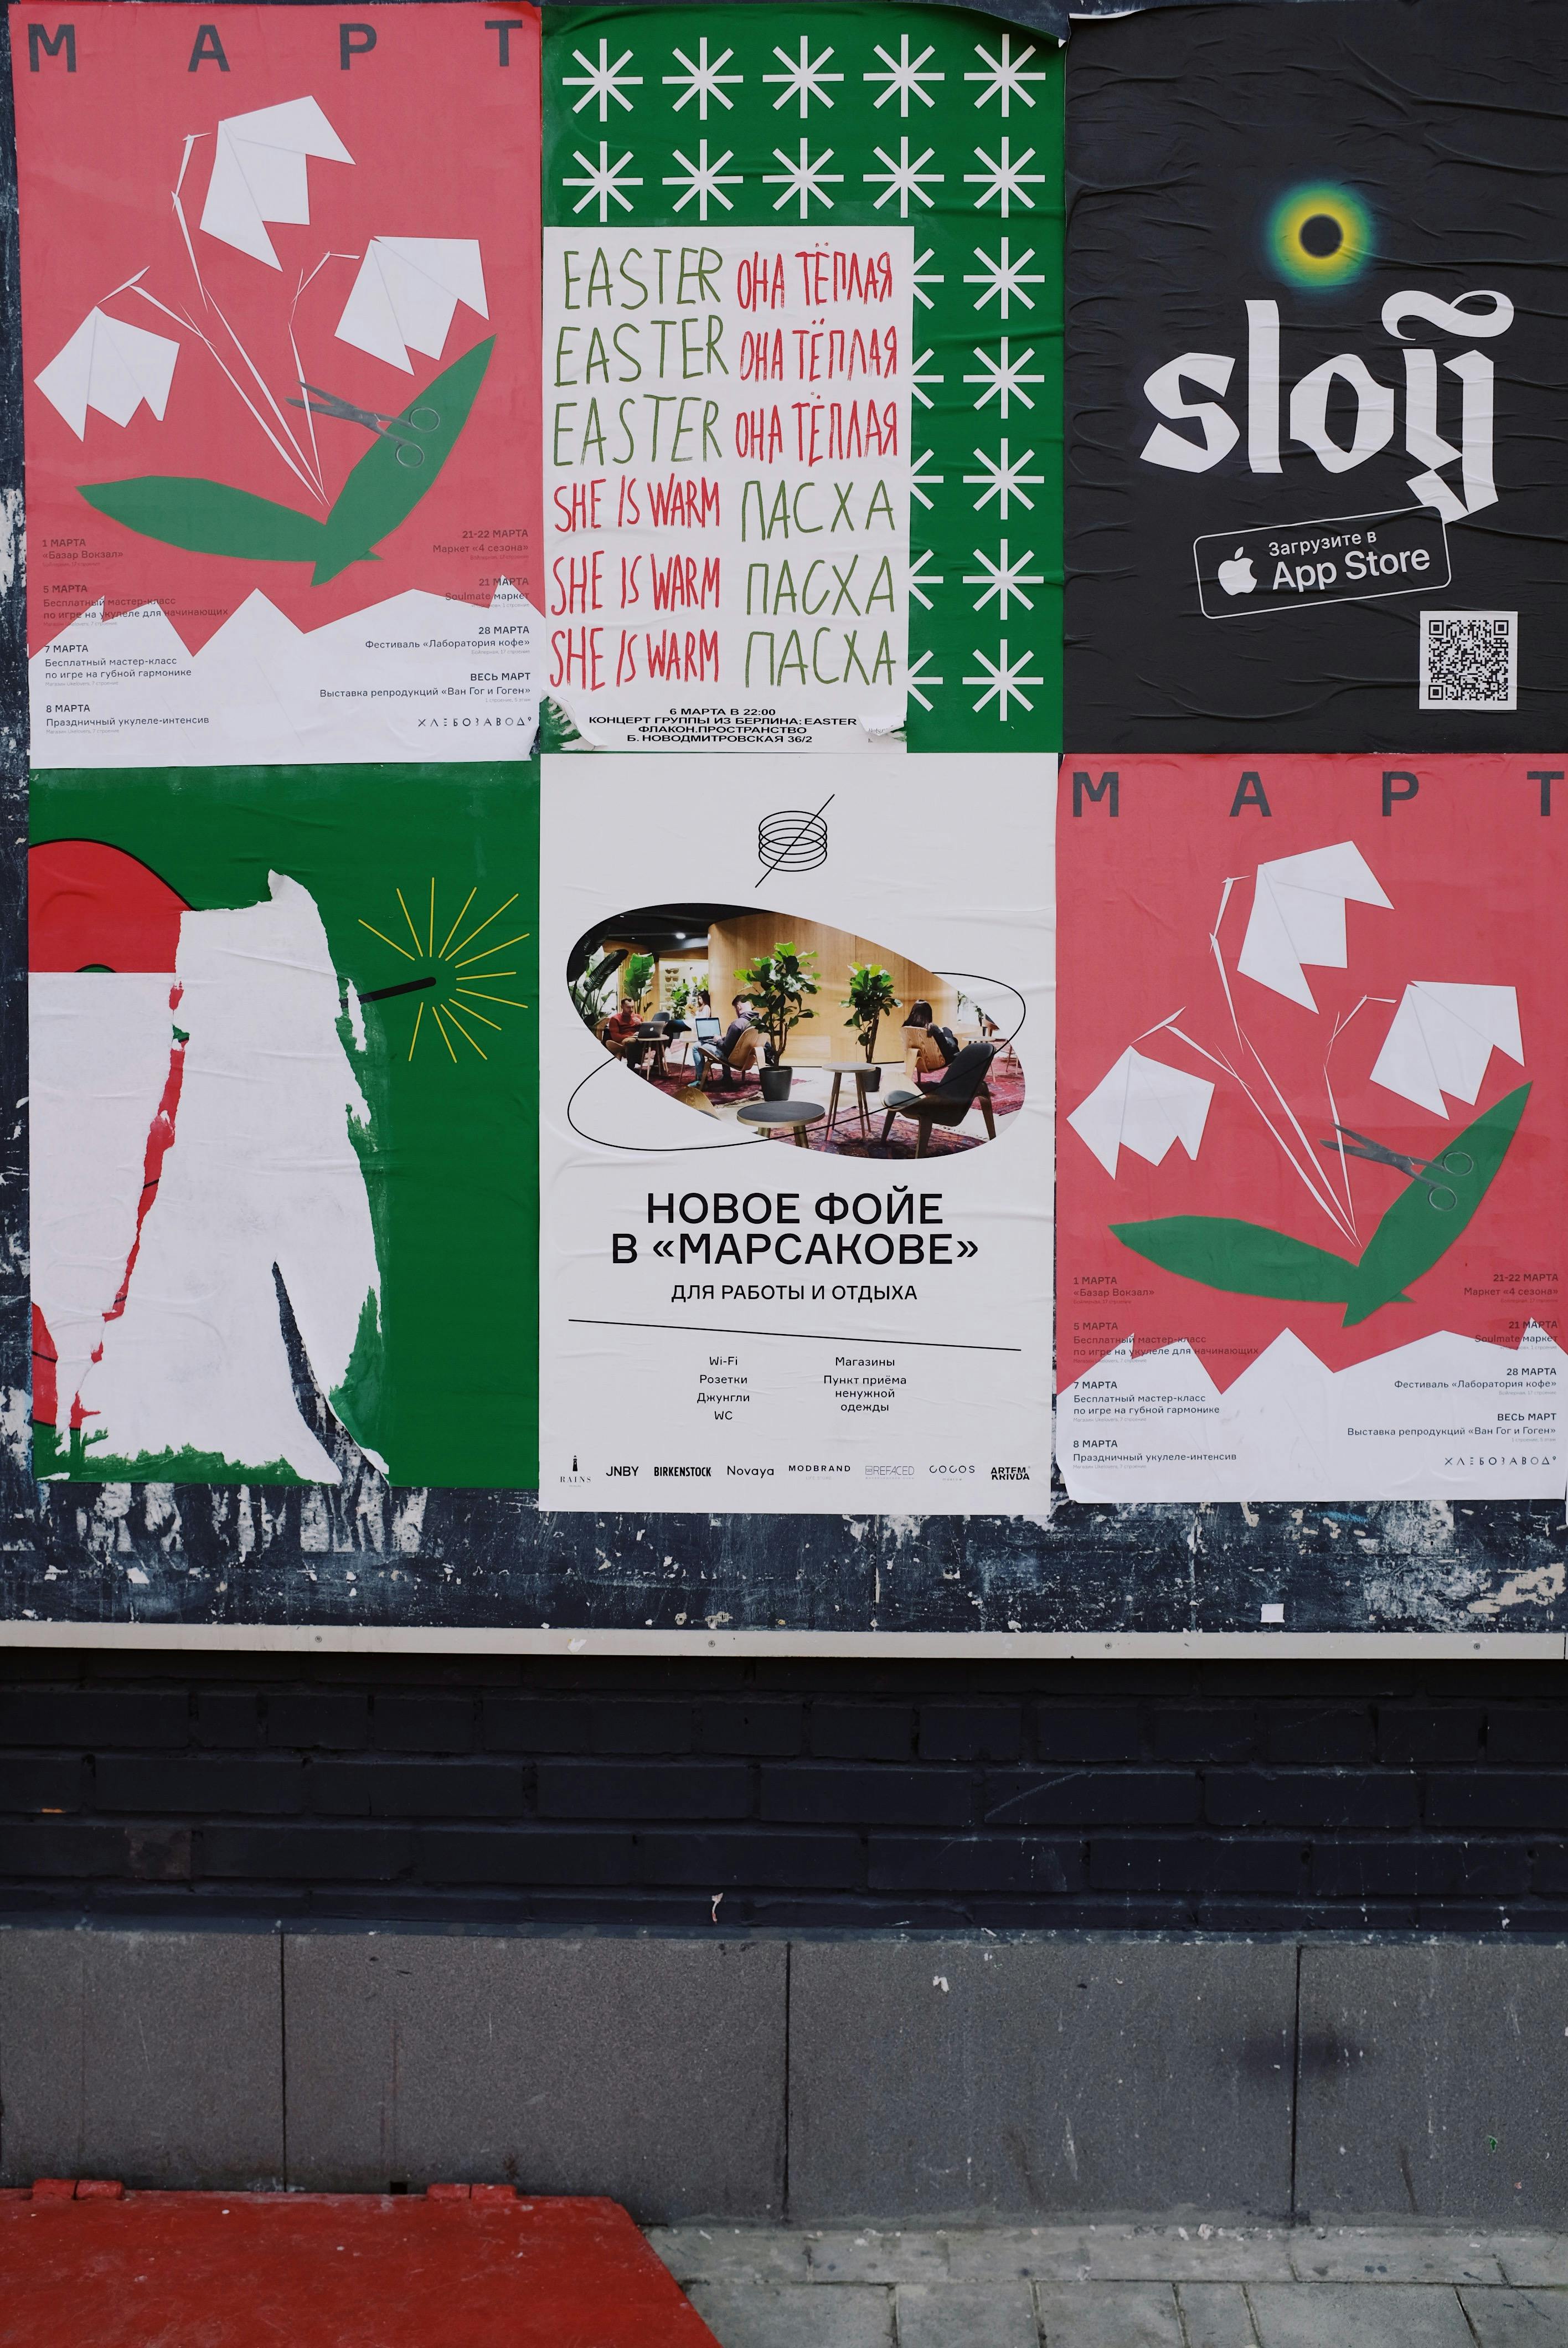 assorted posters placed on street wall